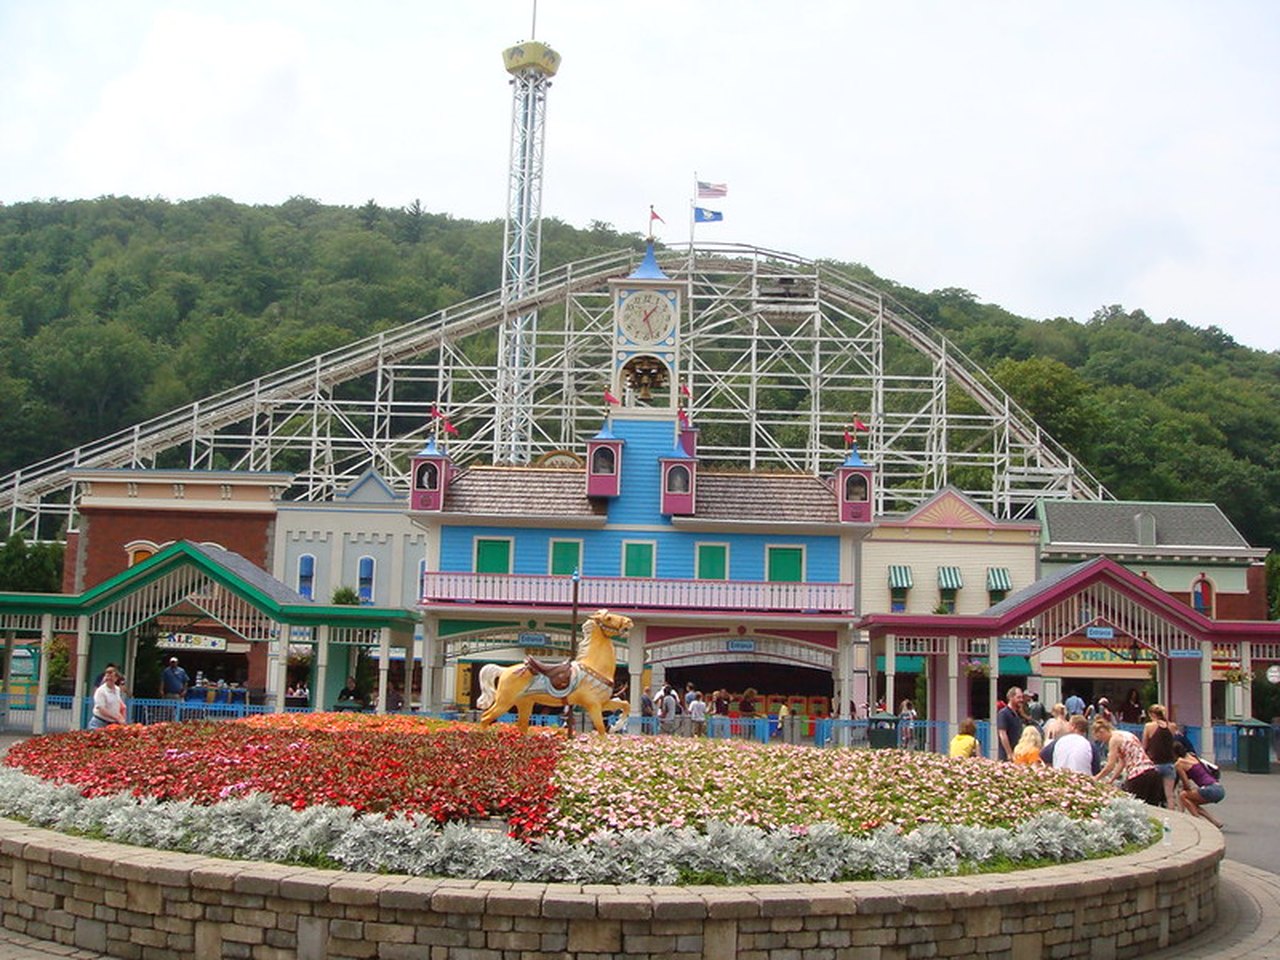 Visit Lake Compounce for a day trip in Connecticut